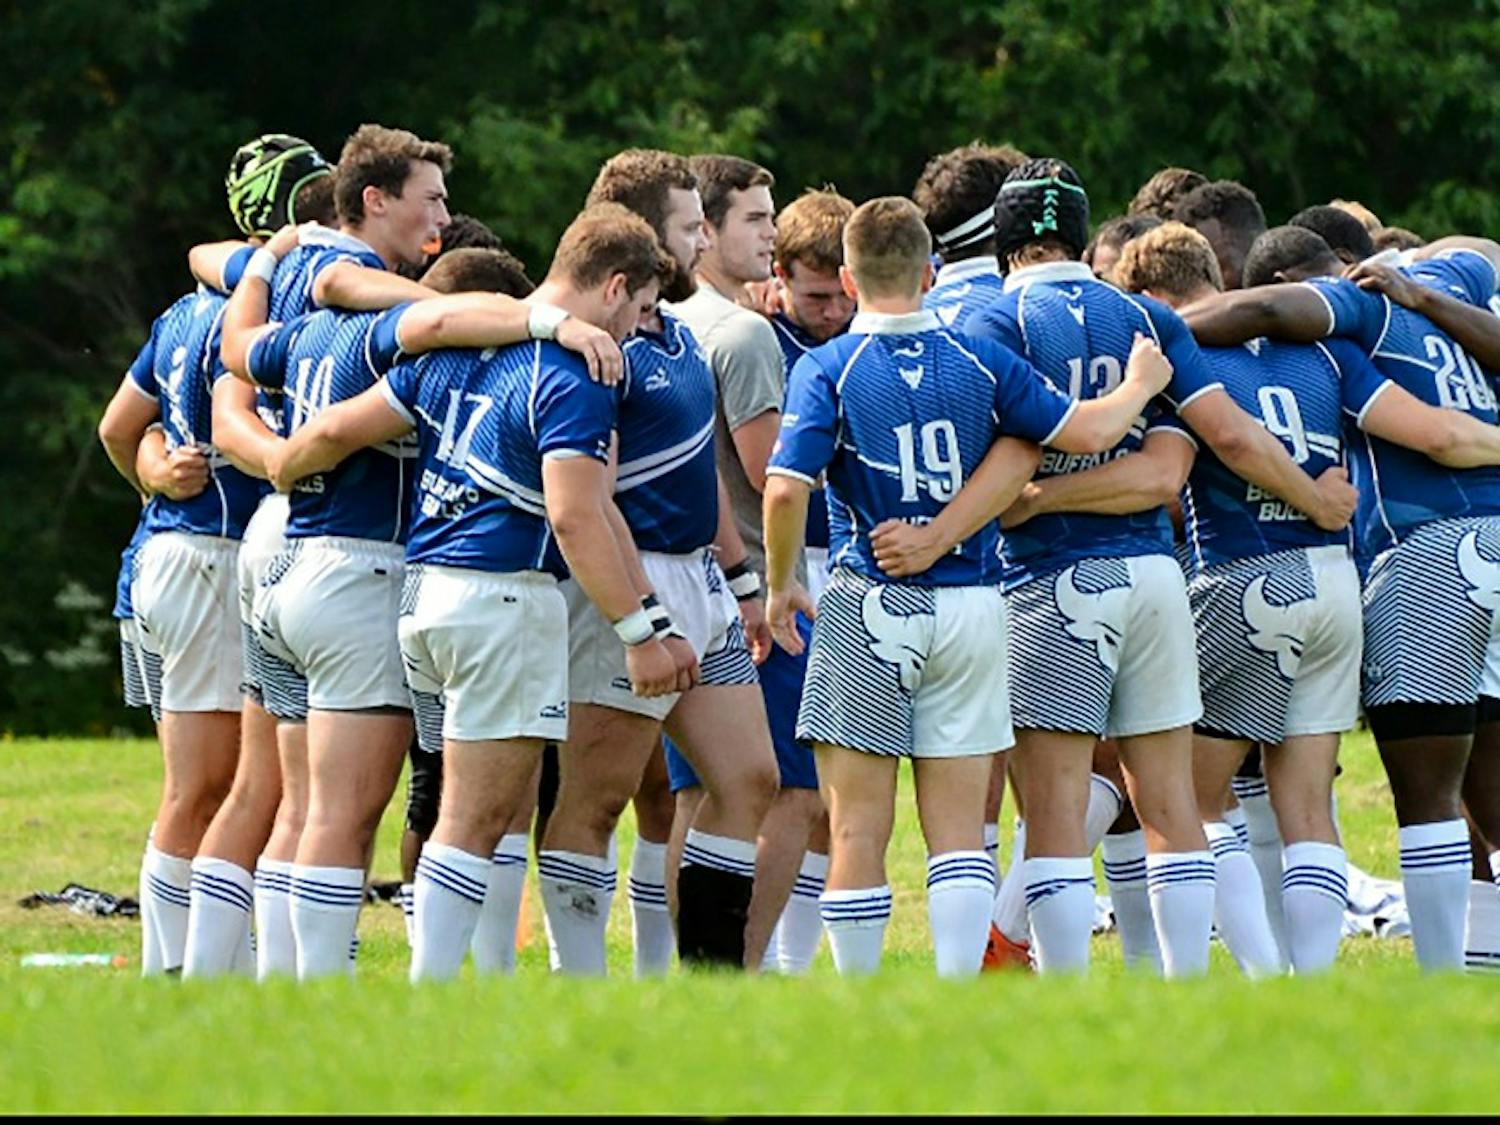 The men's rugby team comes together before the start of their game. The Bulls look to keep improving and establish themselves as a premier team in the country.